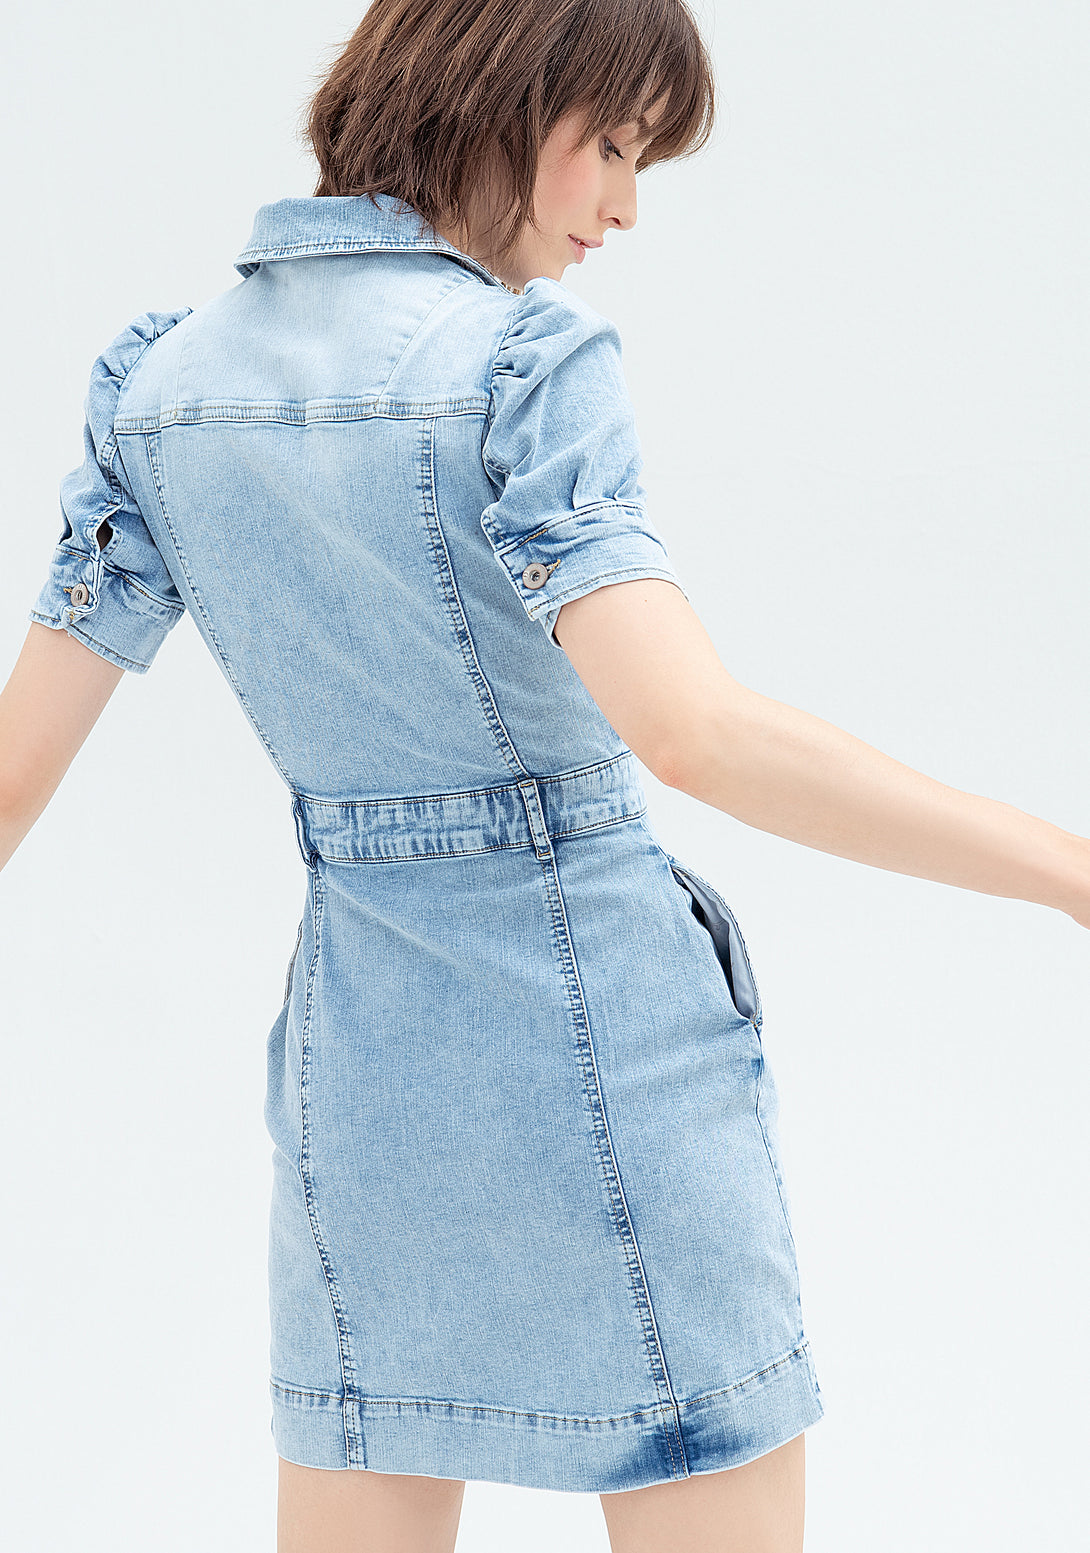 Chemisier dress tight fit made in denim with bleached wash